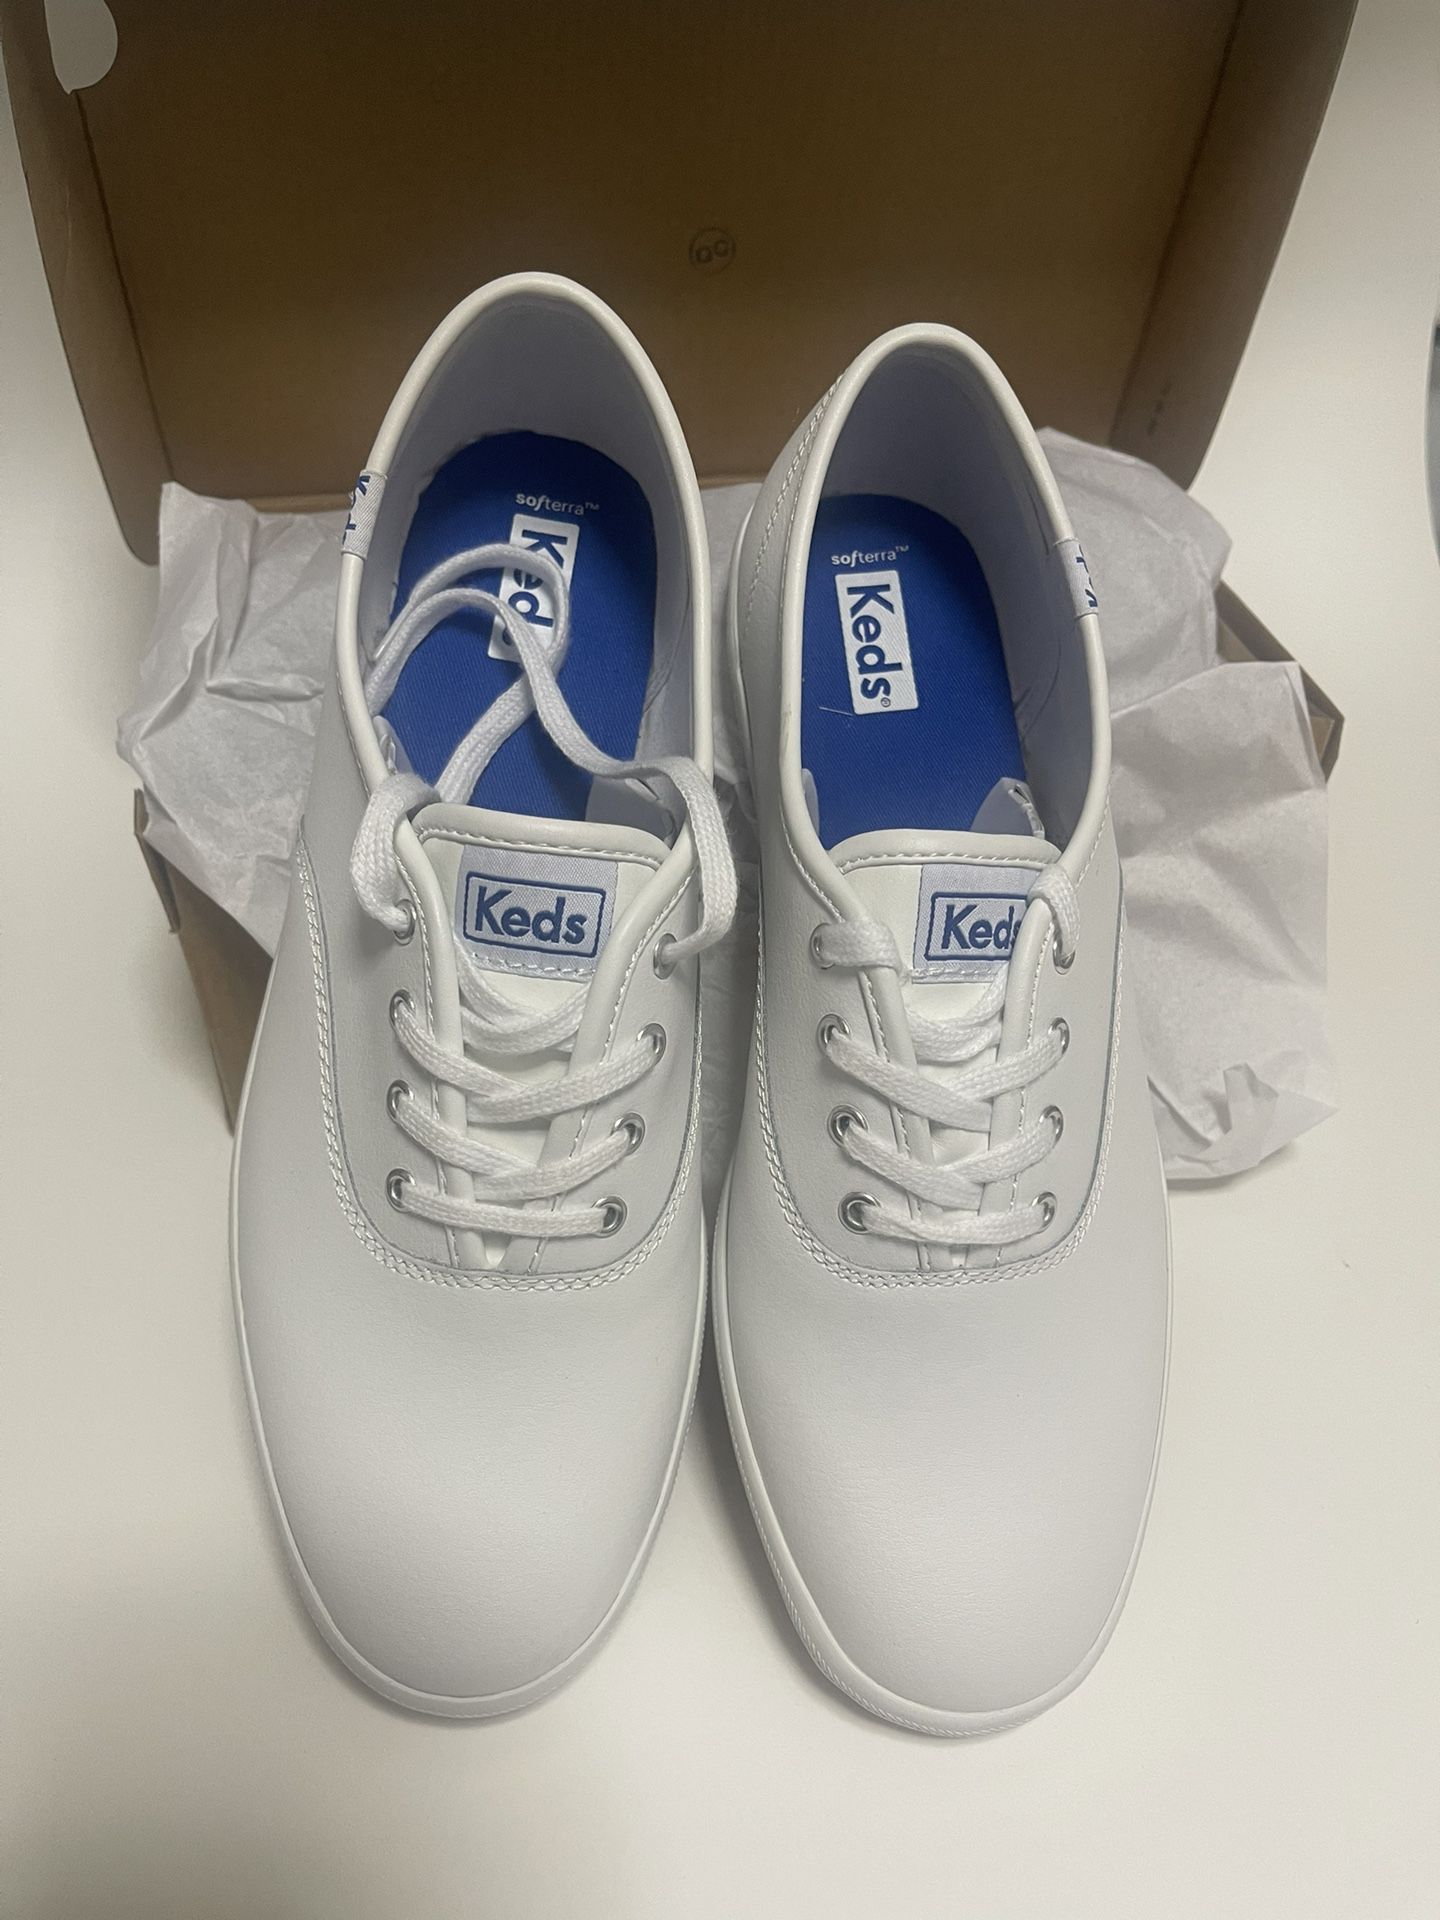 Keds Champion White Leather  Size 8.5 WIDE